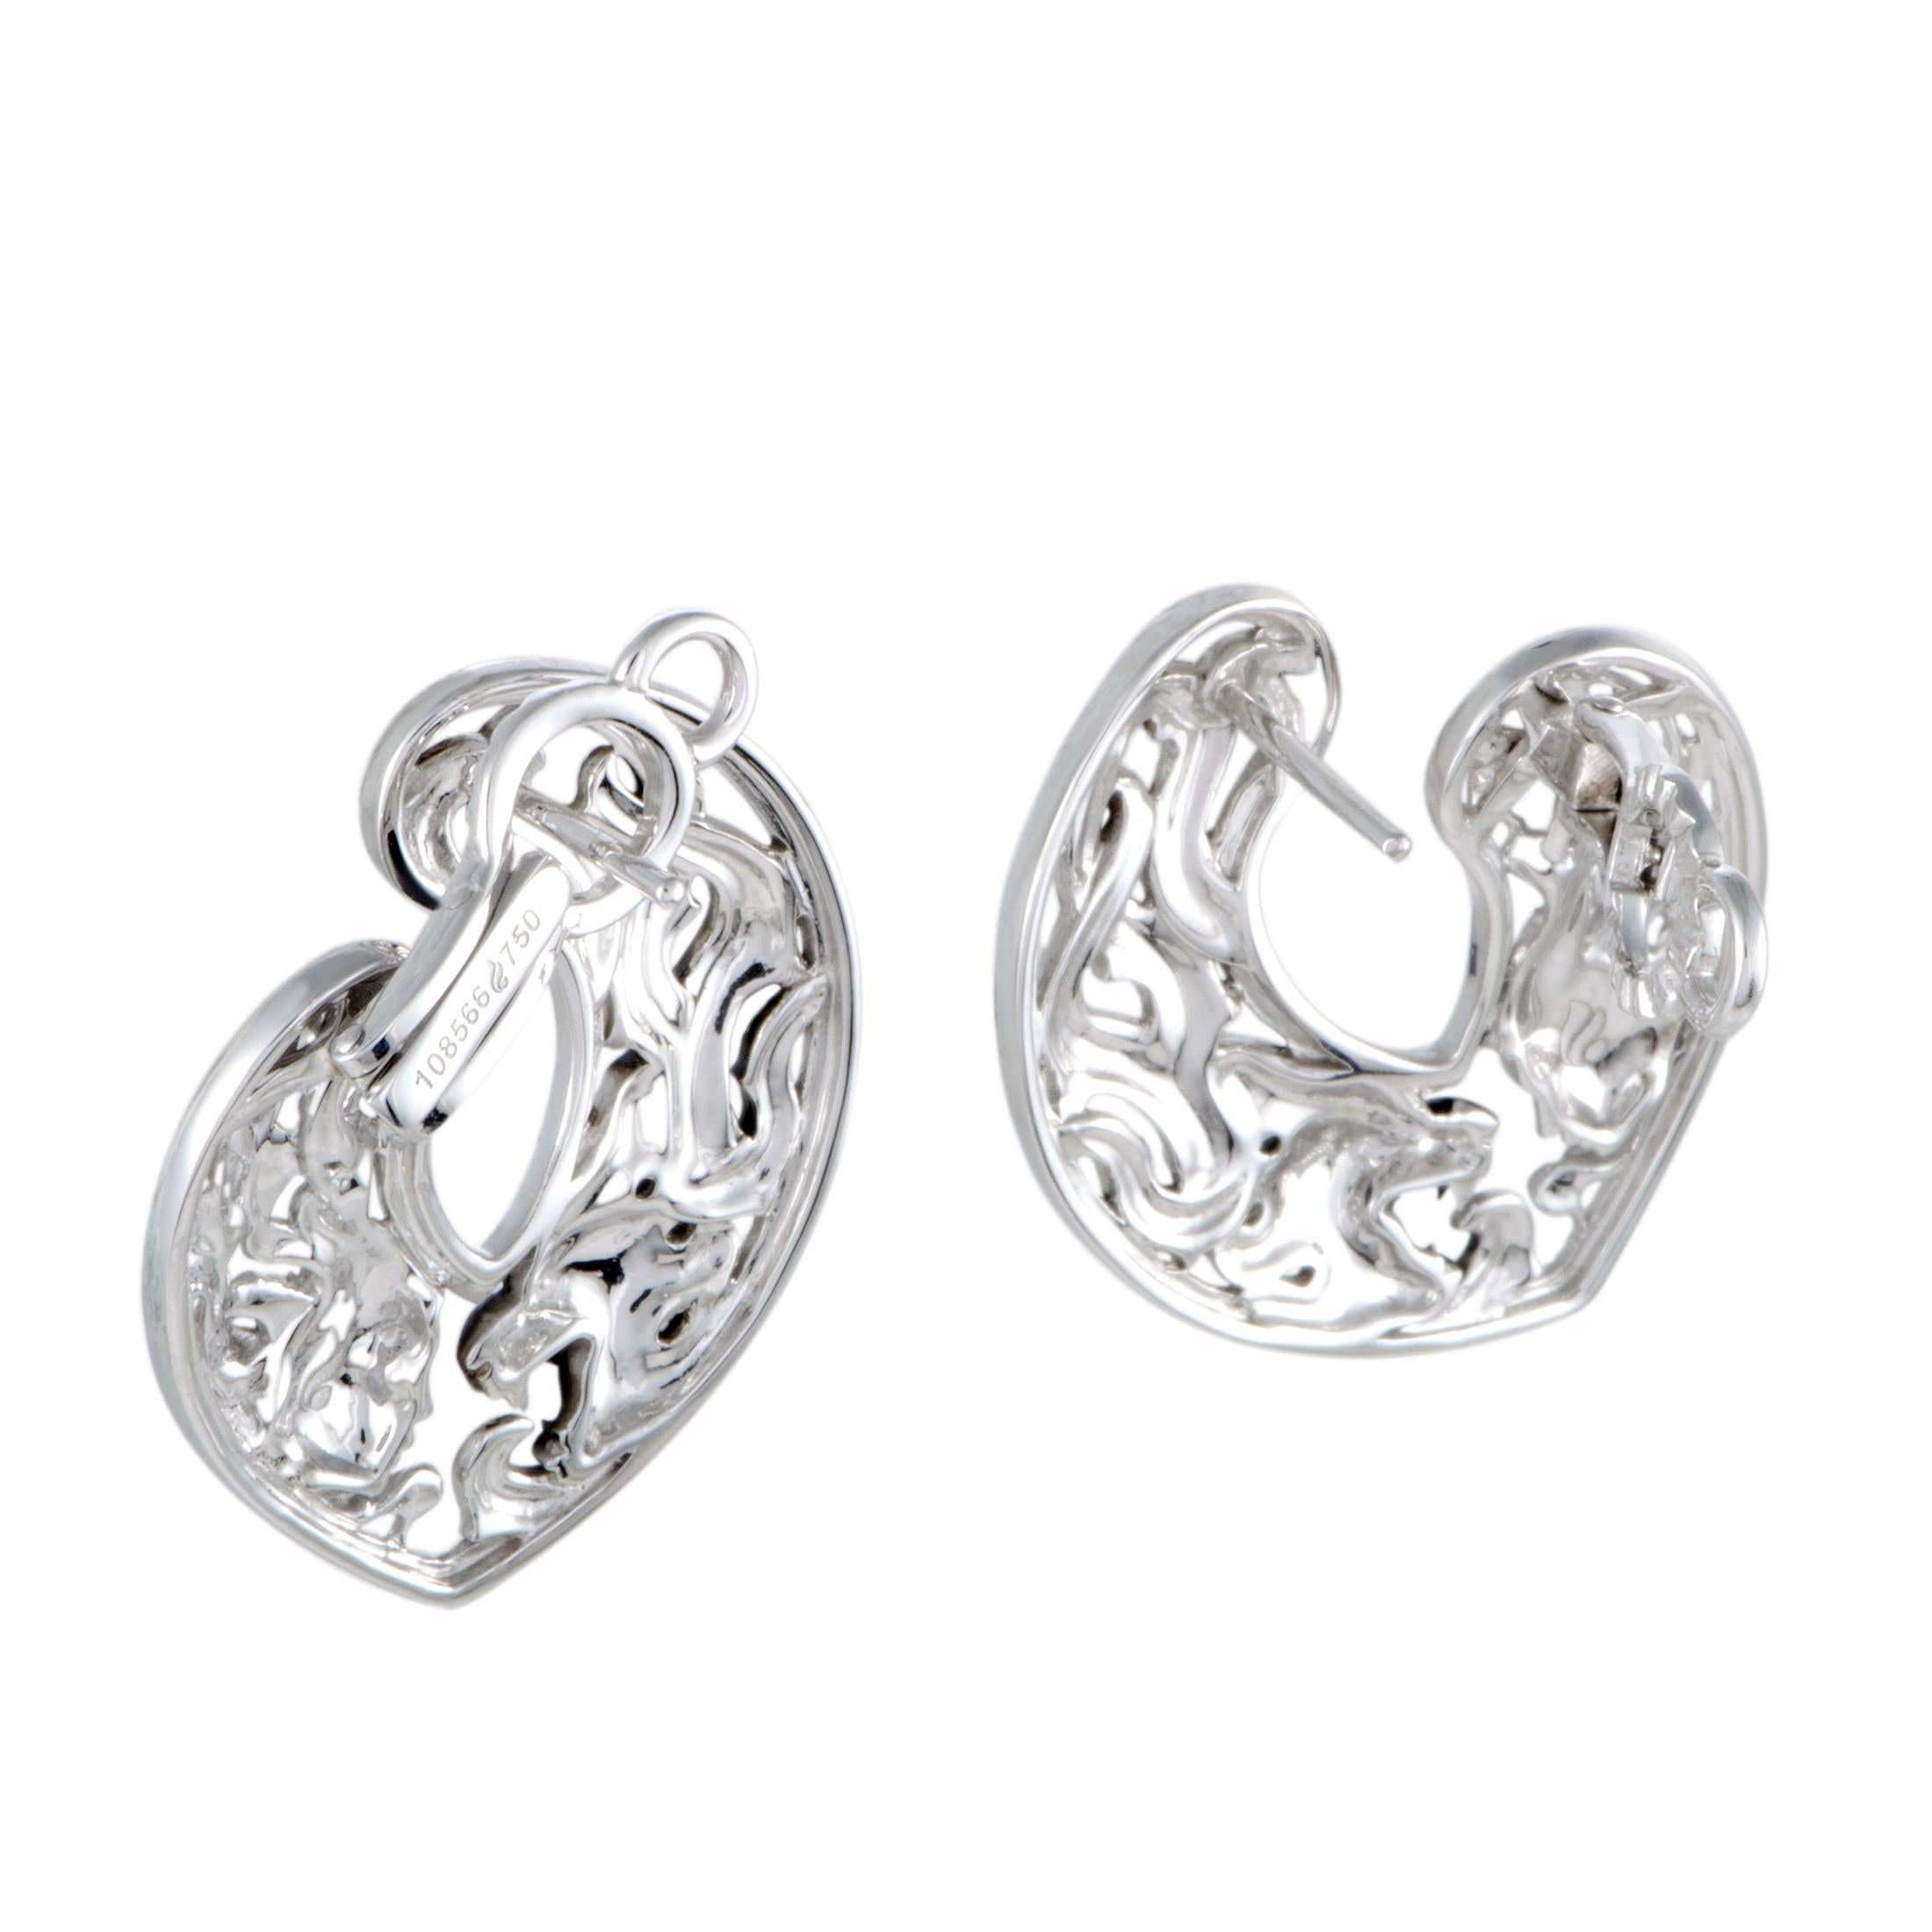 Created for the extraordinary “Instinto” collection that compels with incredibly offbeat designs, these remarkably fashionable earrings offer a look that will accentuate your style in an exceptionally attractive manner. The earrings are presented by